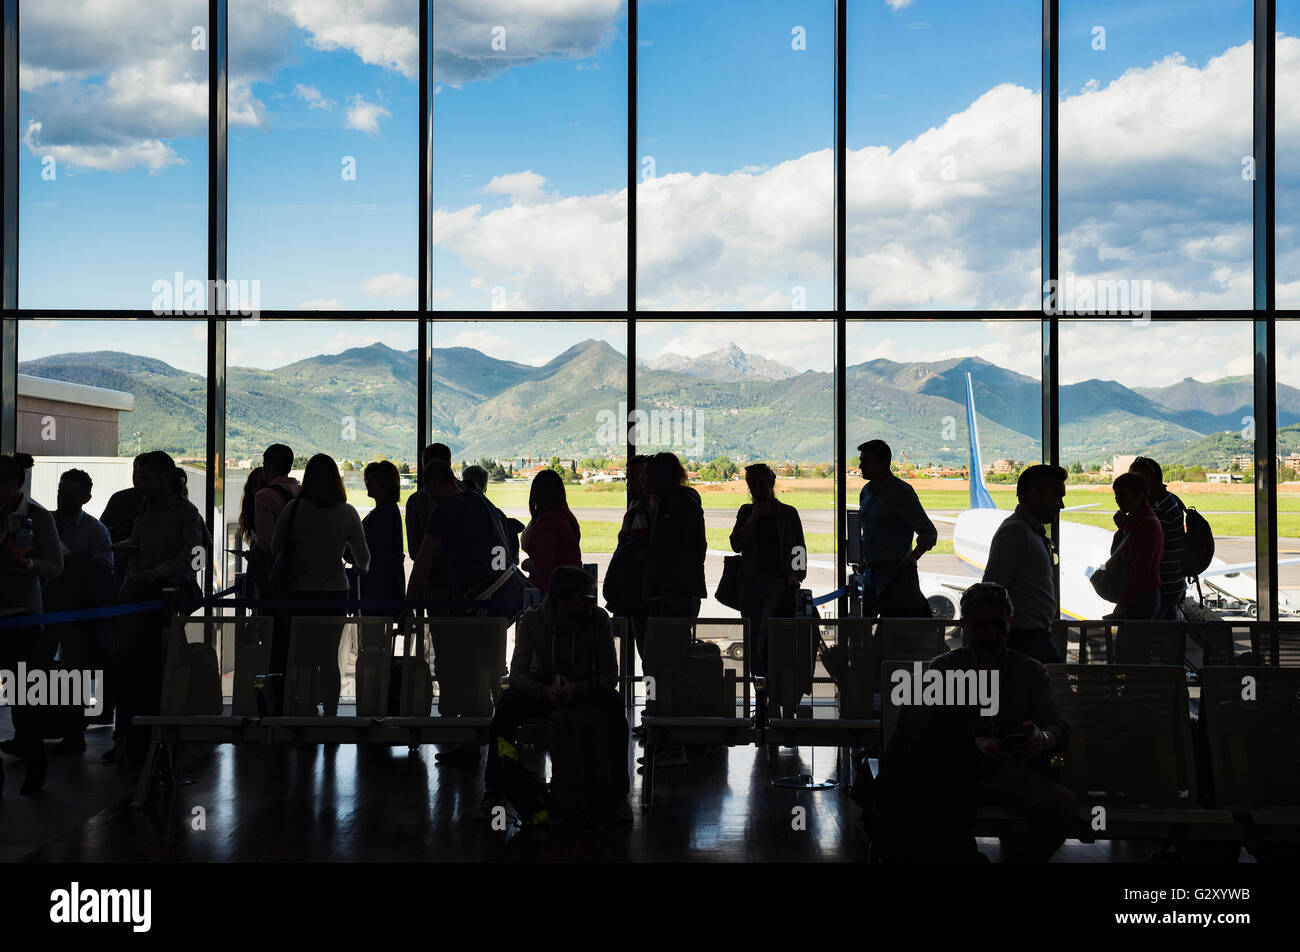 Silhouette queue people waiting in line for airplane in terminal with mountain background, Milano Bergamo airport Stock Photo